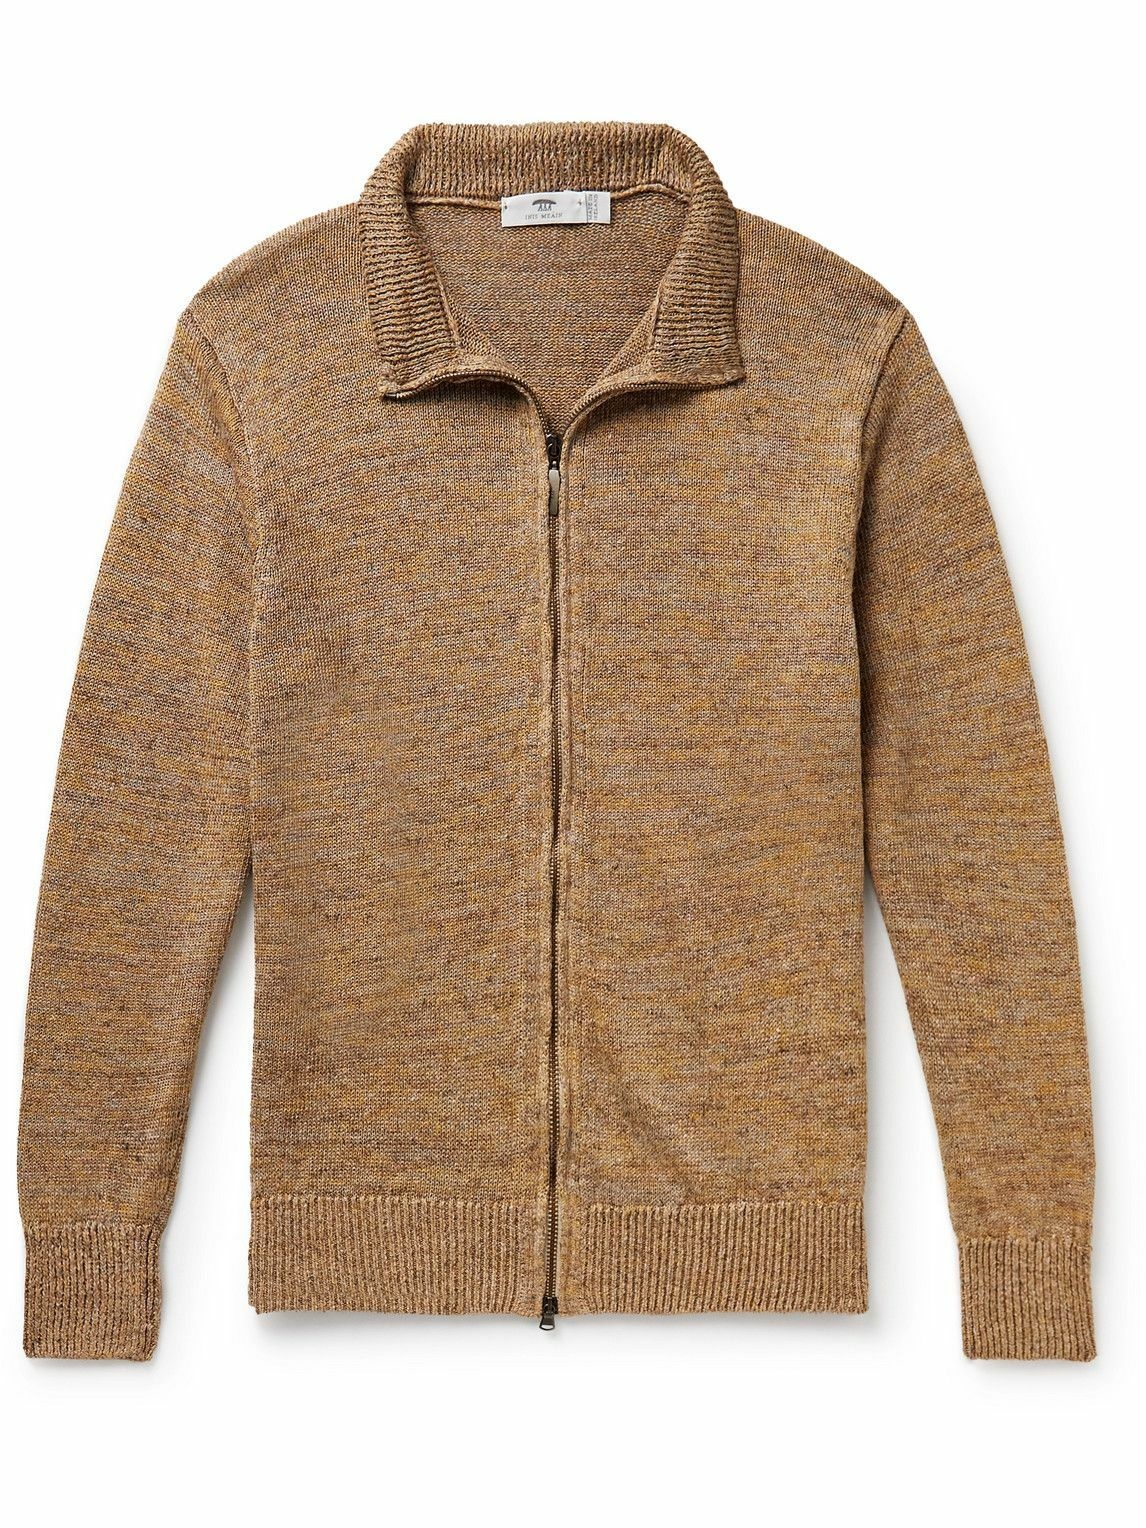 Inis Meáin - Washed-Linen Zip-Up Cardigan - Brown Inis Meáin